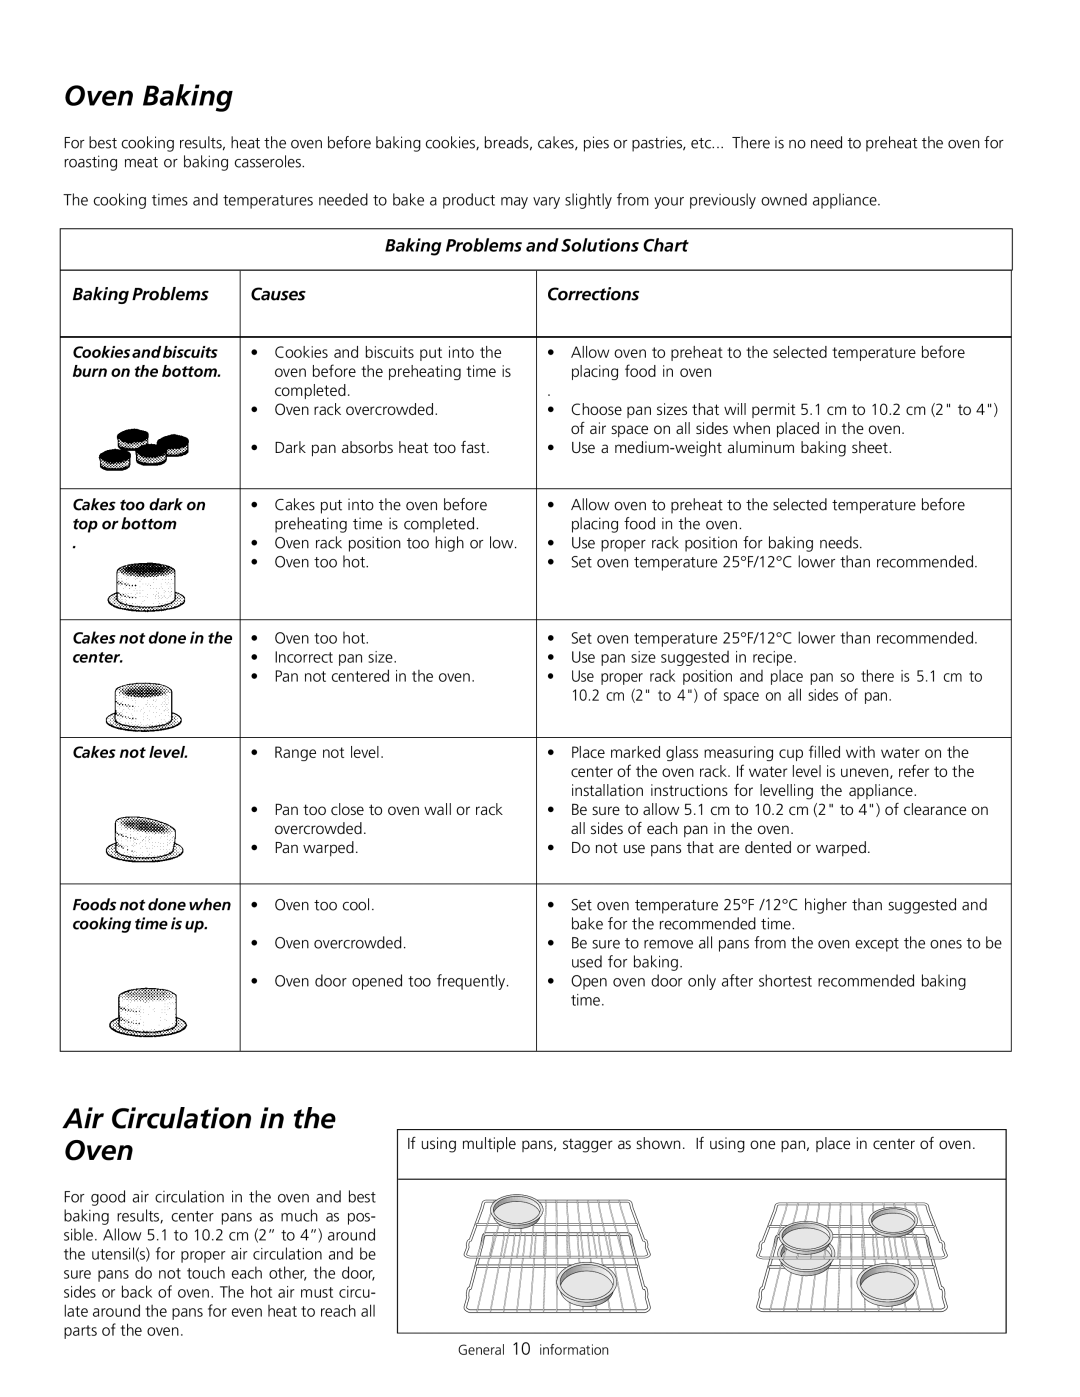 Frigidaire 318200805 Oven Baking, Air Circulation in the Oven, Baking Problems and Solutions Chart, Causes, Corrections 